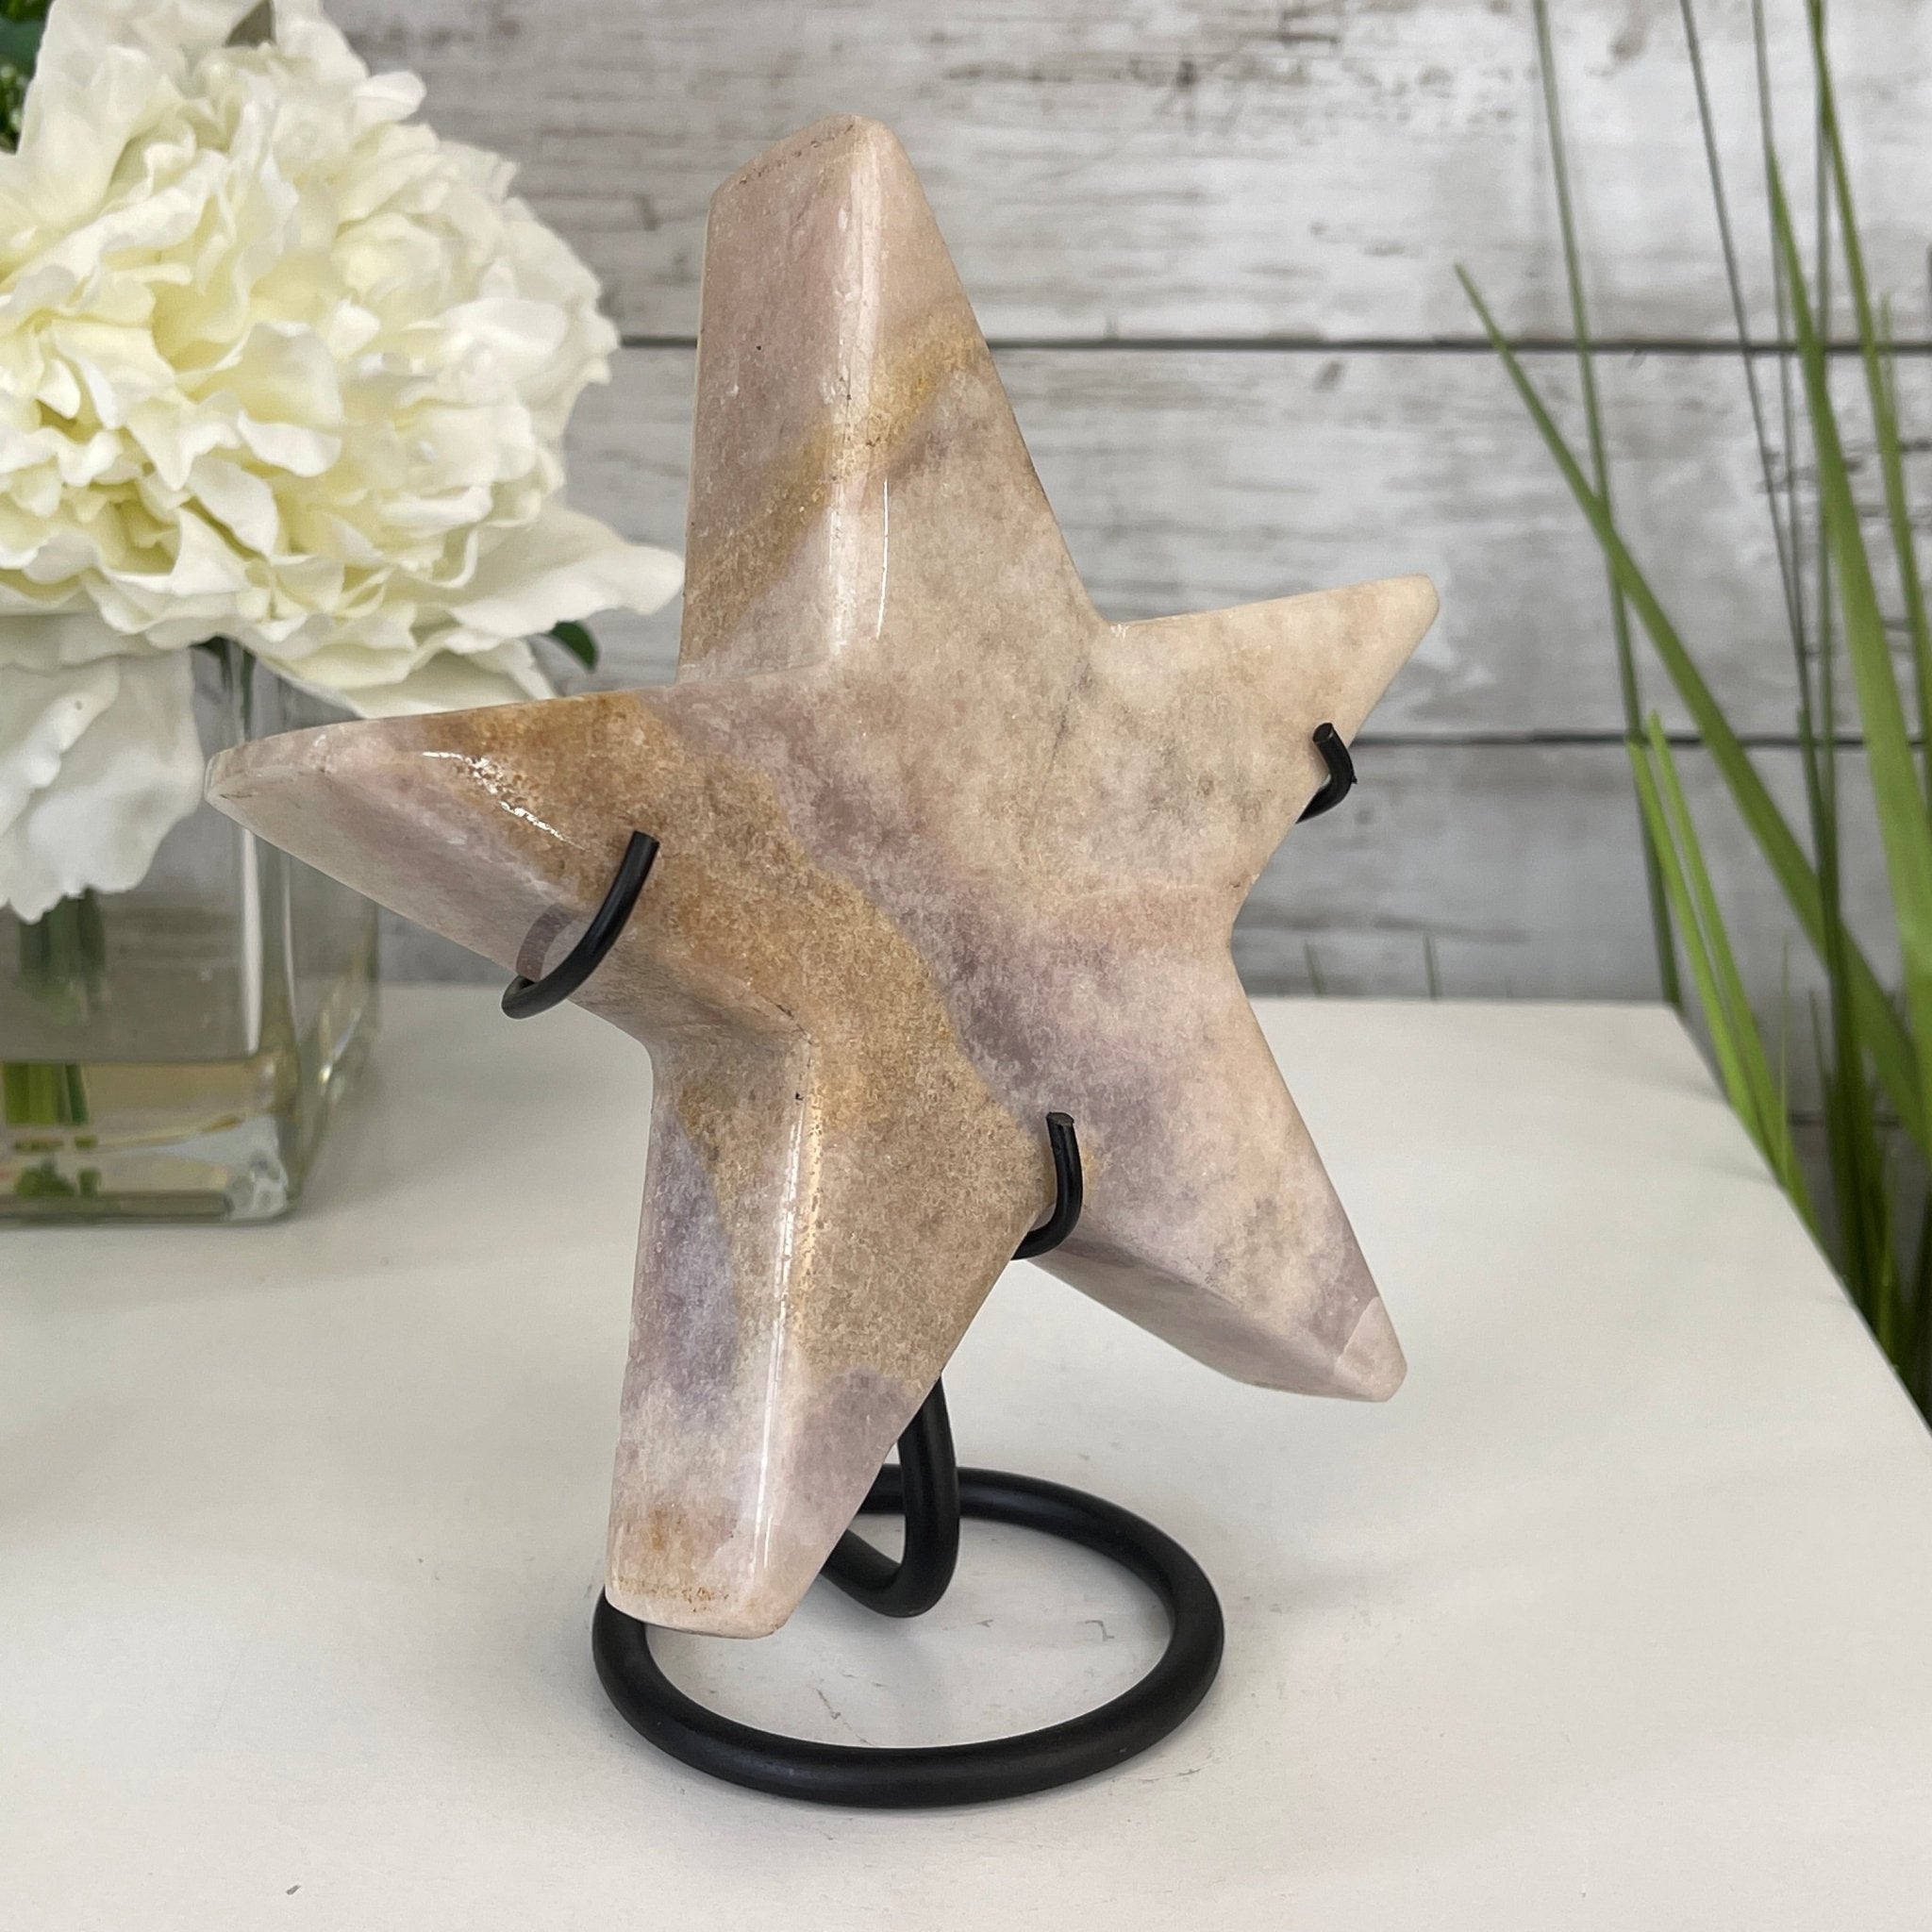 Pink Amethyst Star on a Metal Stand 7.5" Tall #5746-0009 by Brazil Gems - Brazil GemsBrazil GemsPink Amethyst Star on a Metal Stand 7.5" Tall #5746-0009 by Brazil GemsStars5746-0009